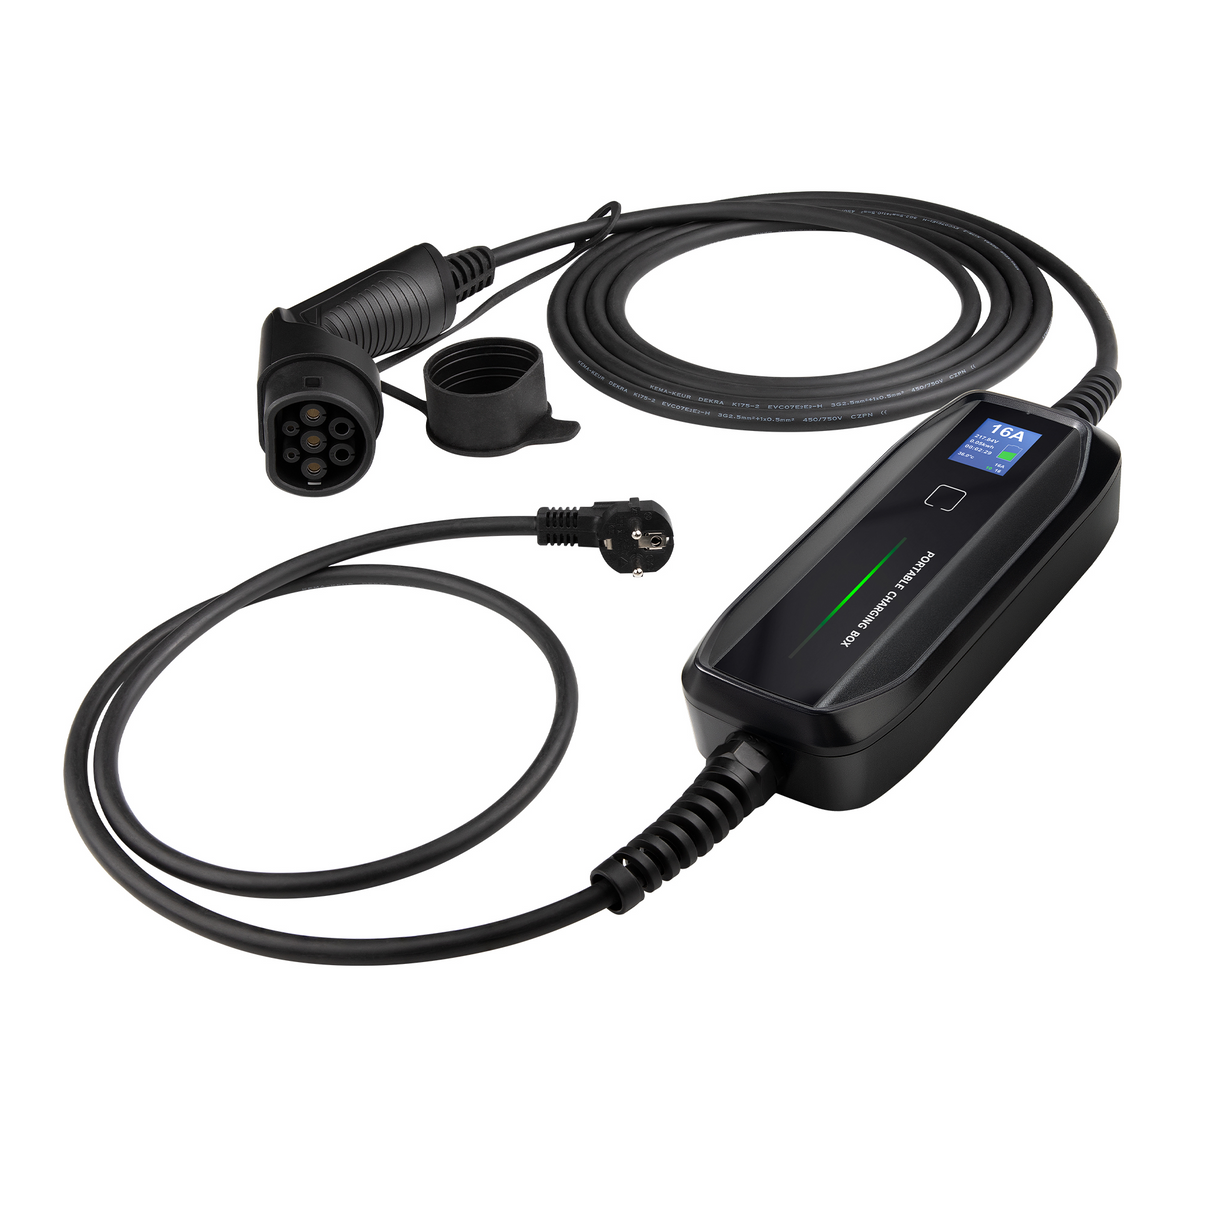 Mobile Charger Kia Ceed Sportswagon - Besen with LCD - Type 2 to Schuko